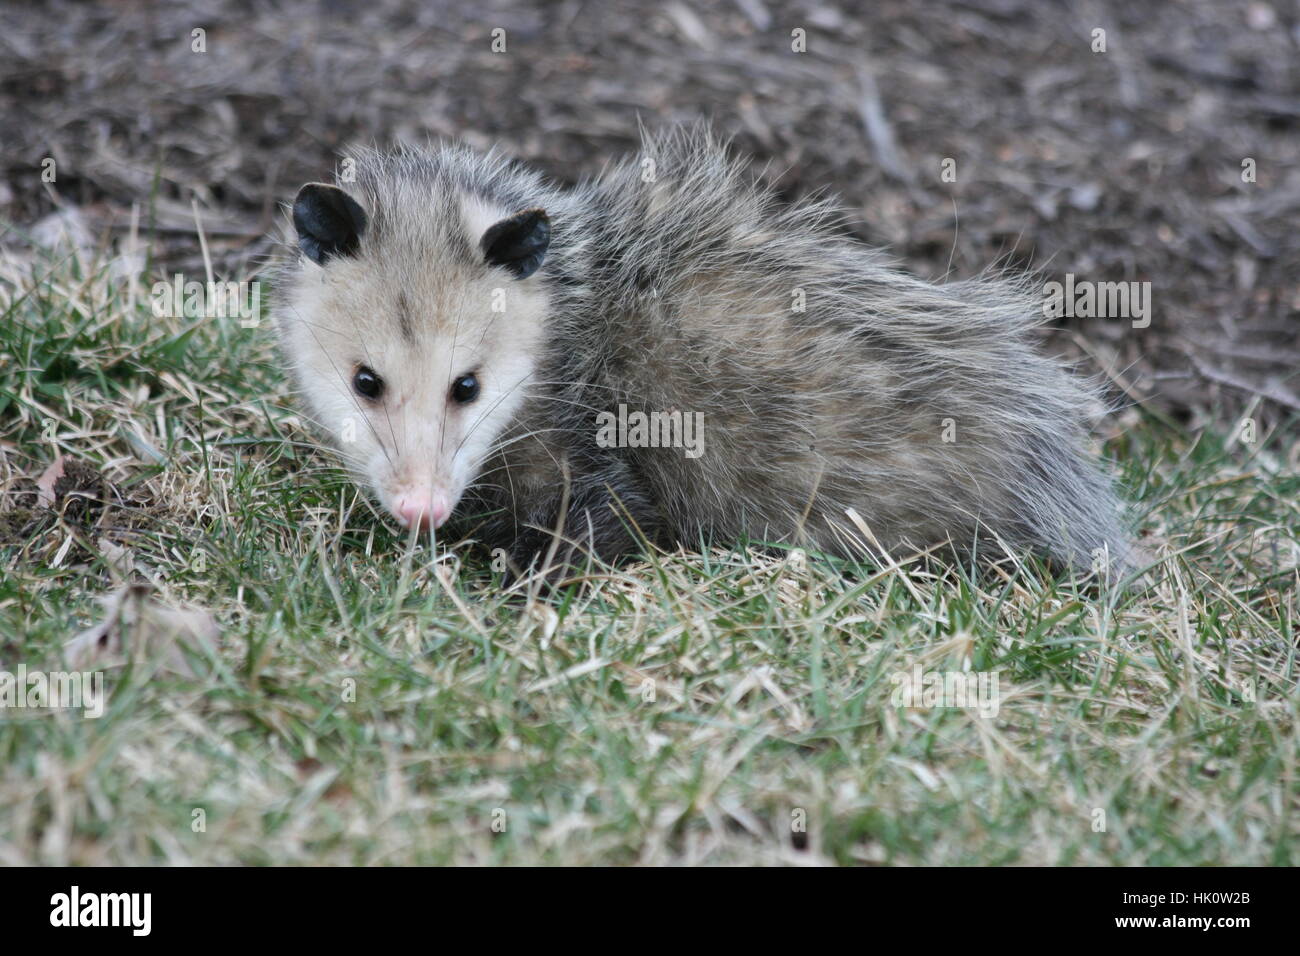 Cute gray opossum with beady black eyes poses in the mulch and  grass. Stock Photo